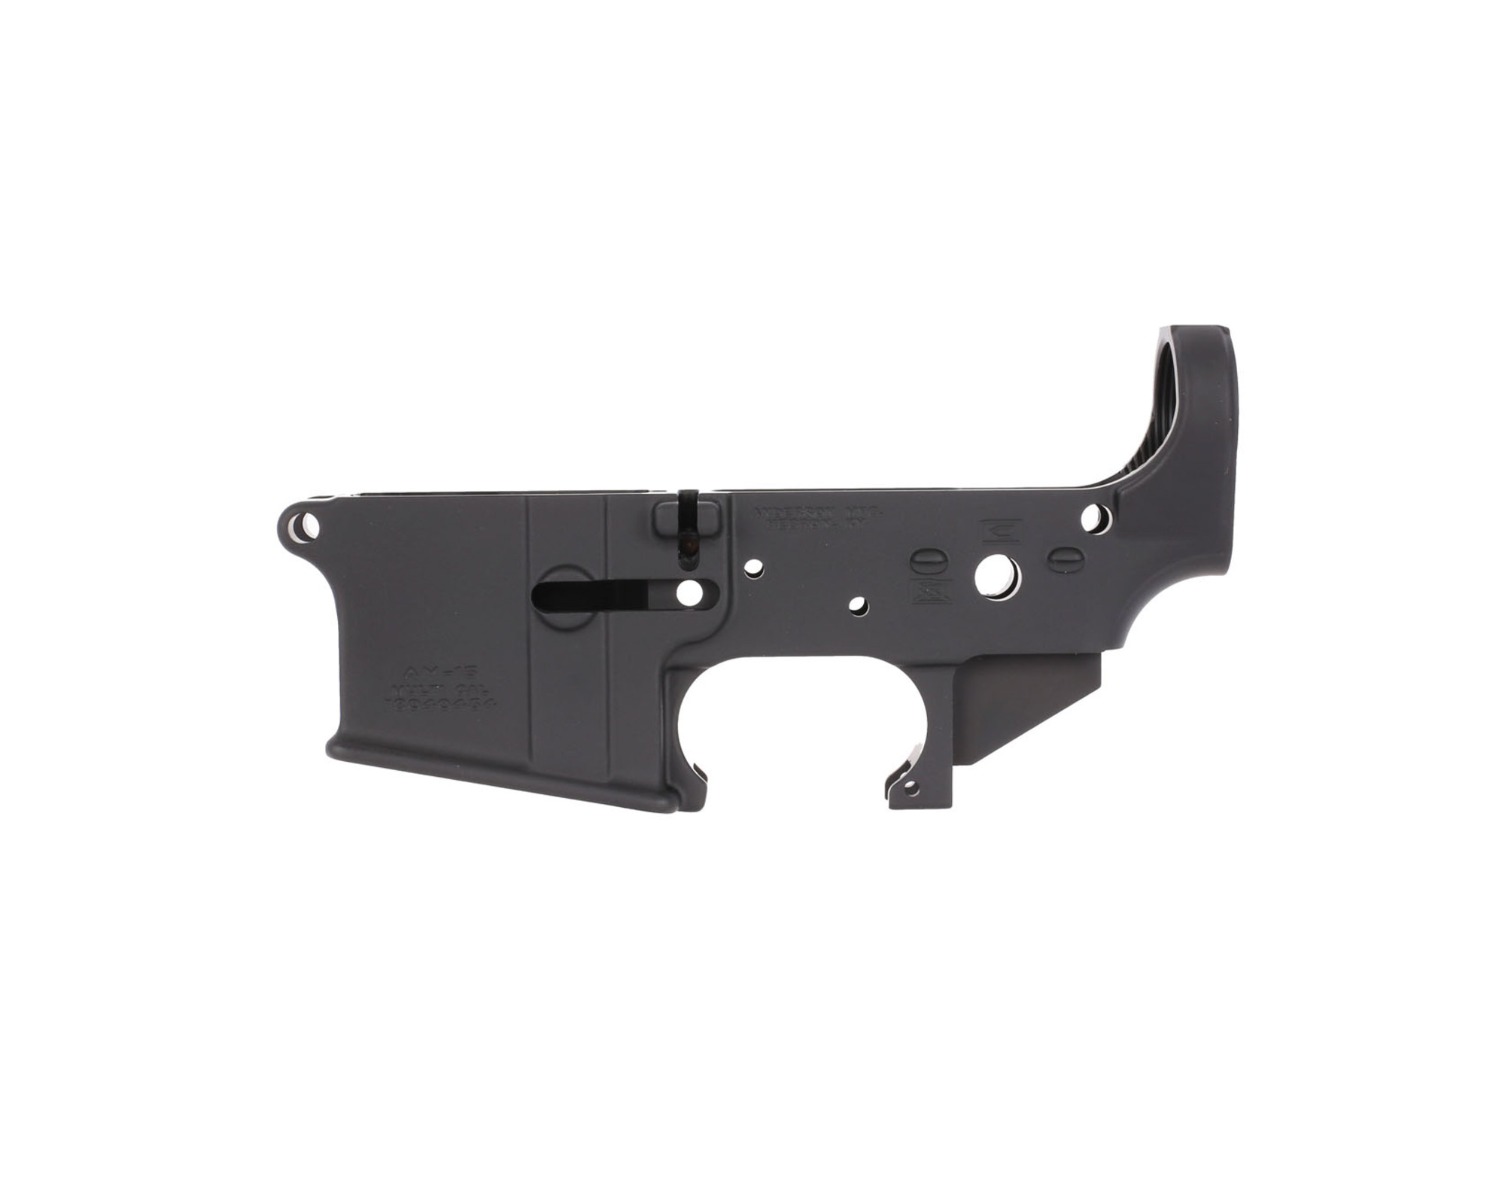 Anderson AM-15 Forged Stripped AR15 Lower Receiver - Black | No Logo